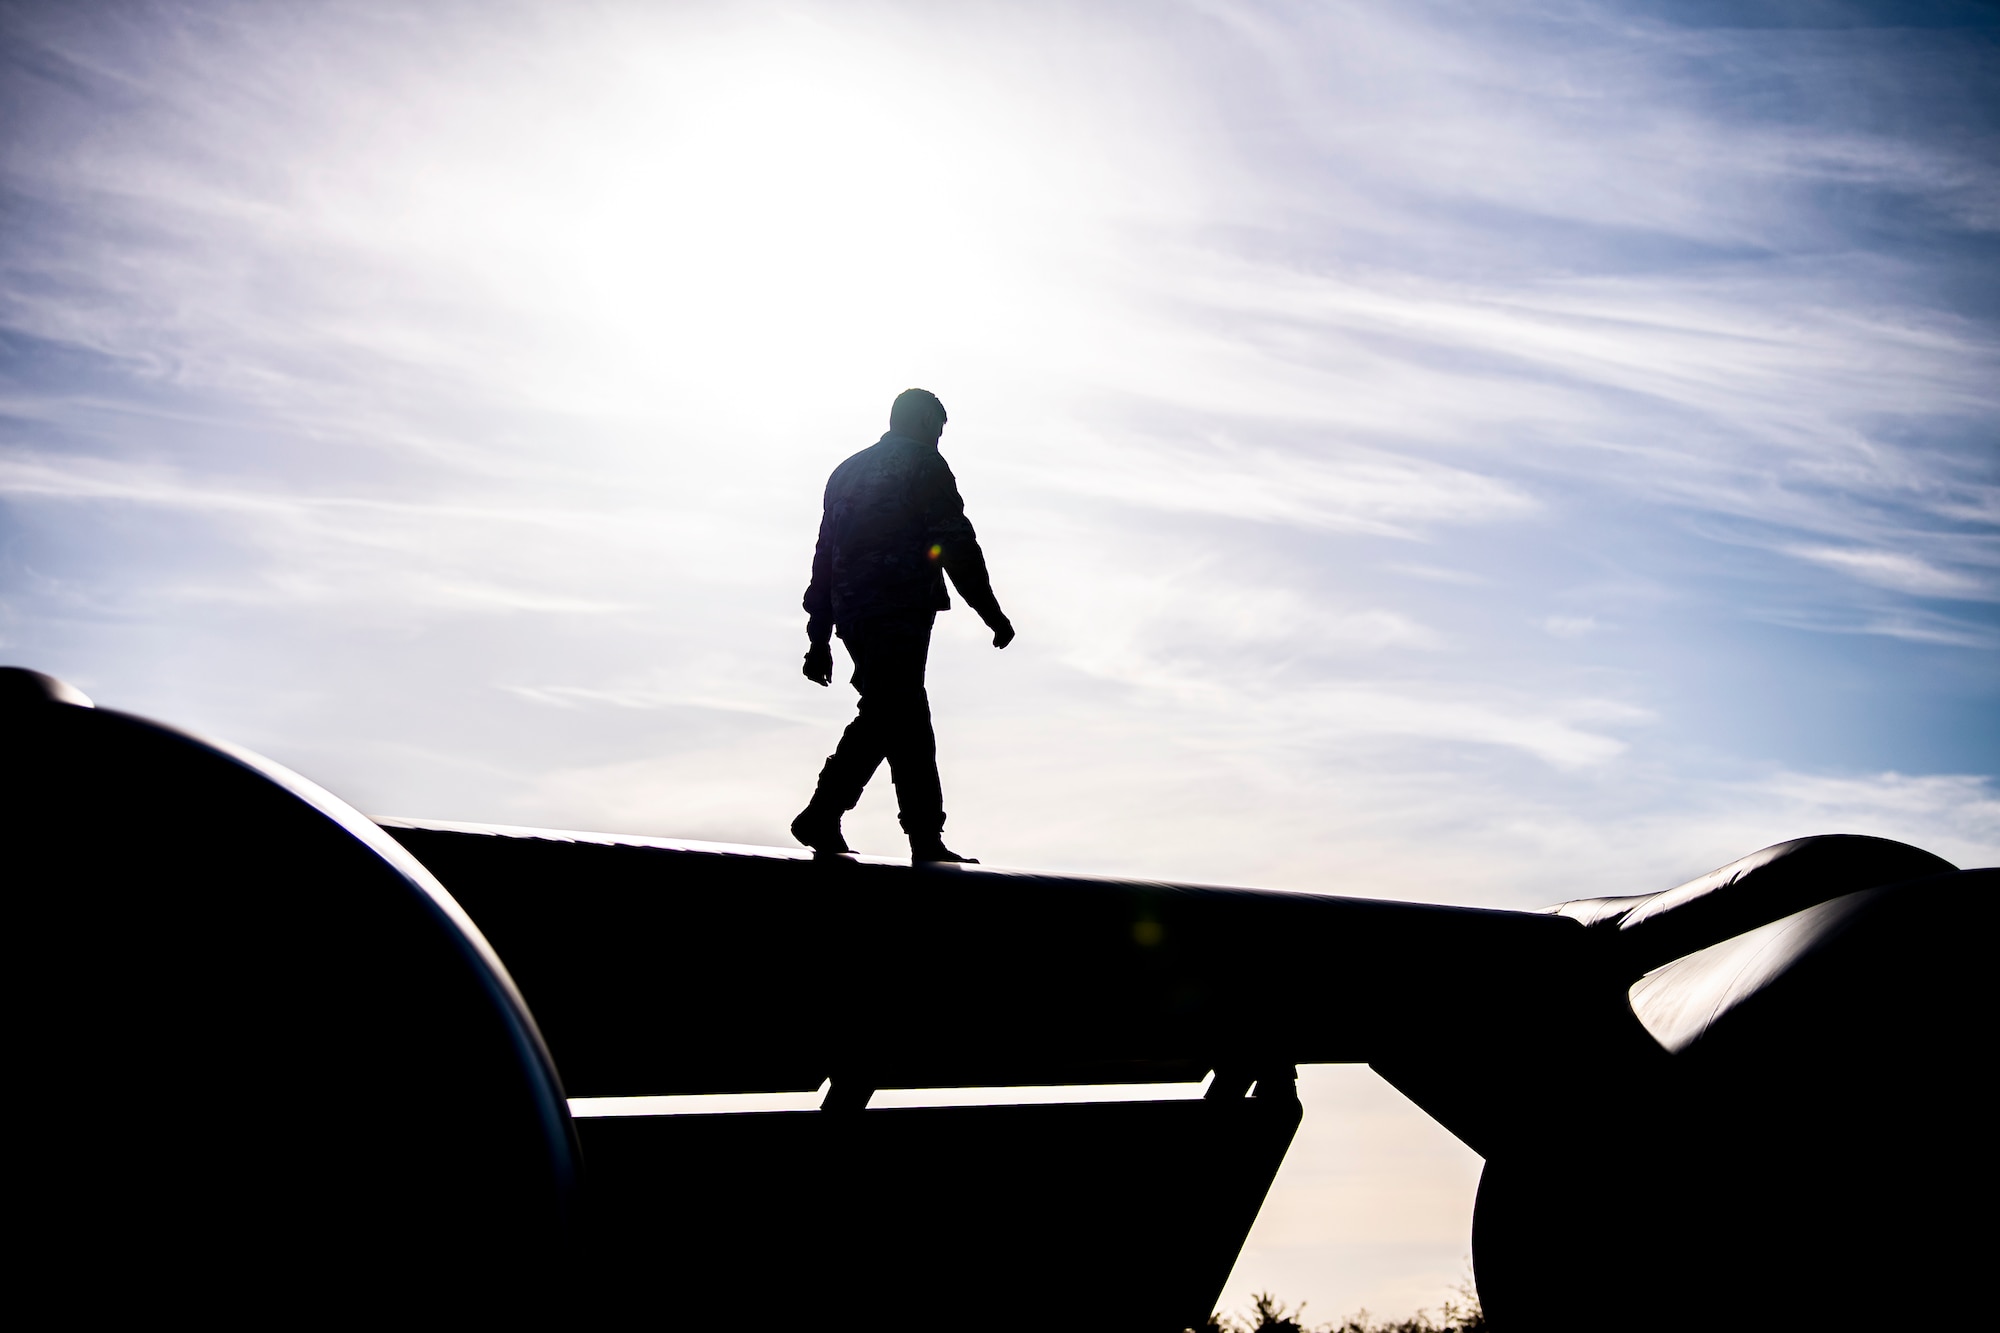 An Airman from the 100th Aircraft Maintenance Squadron walks on the wing of a KC-135 Stratotanker at RAF Fairford, England, Nov. 1, 2021. Airmen from the 100th Air Refueling Wing conducted operations out of RAFF as part of an Agile Combat Employment exercise. ACE enables U.S. forces in Europe to operate from locations with varying levels of capacity and support. This further ensures Airmen and aircrews are postured to deliver lethal combat power across the full spectrum of military operations. (U.S. Air Force photo by Senior Airman Eugene Oliver)